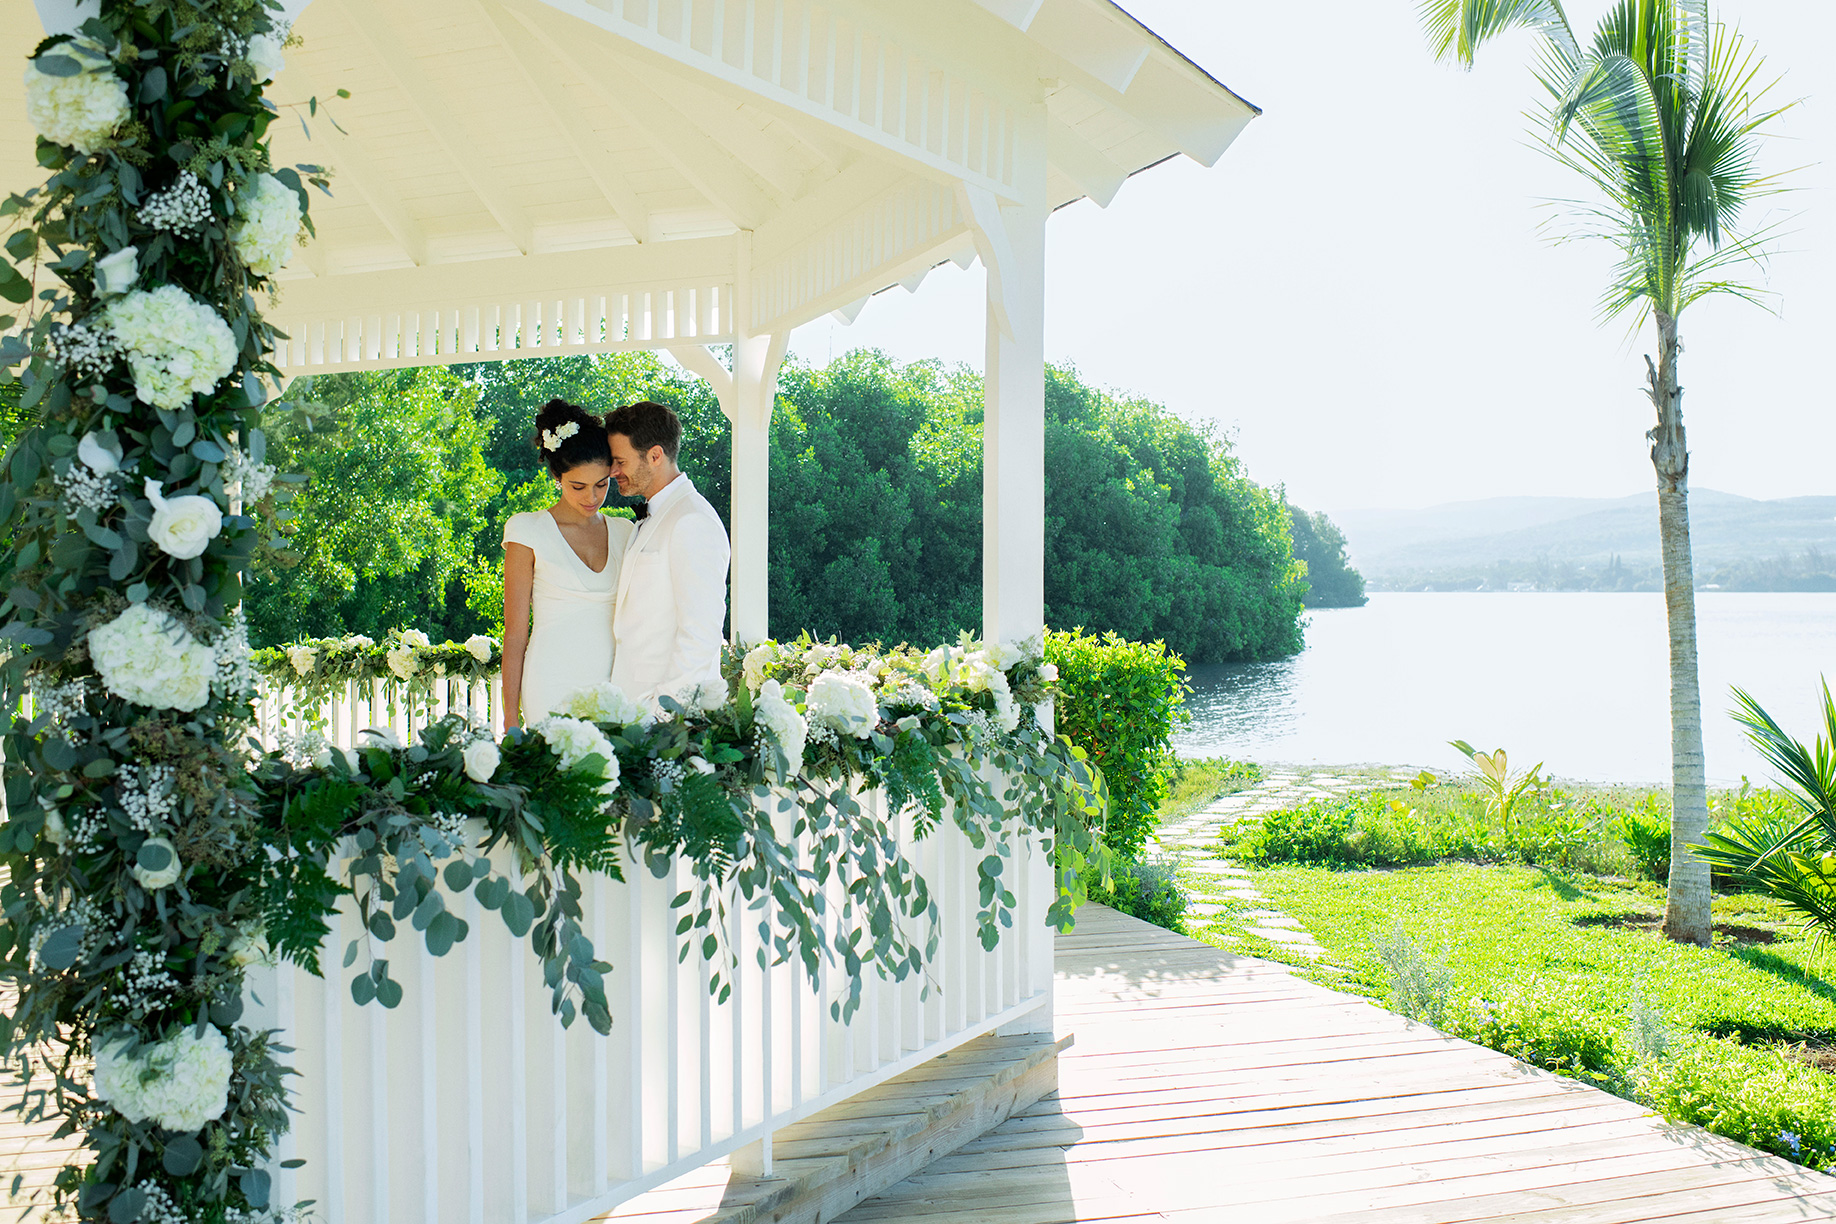 Wedding by the tropical lagoon of Montego Bay in Jamaica